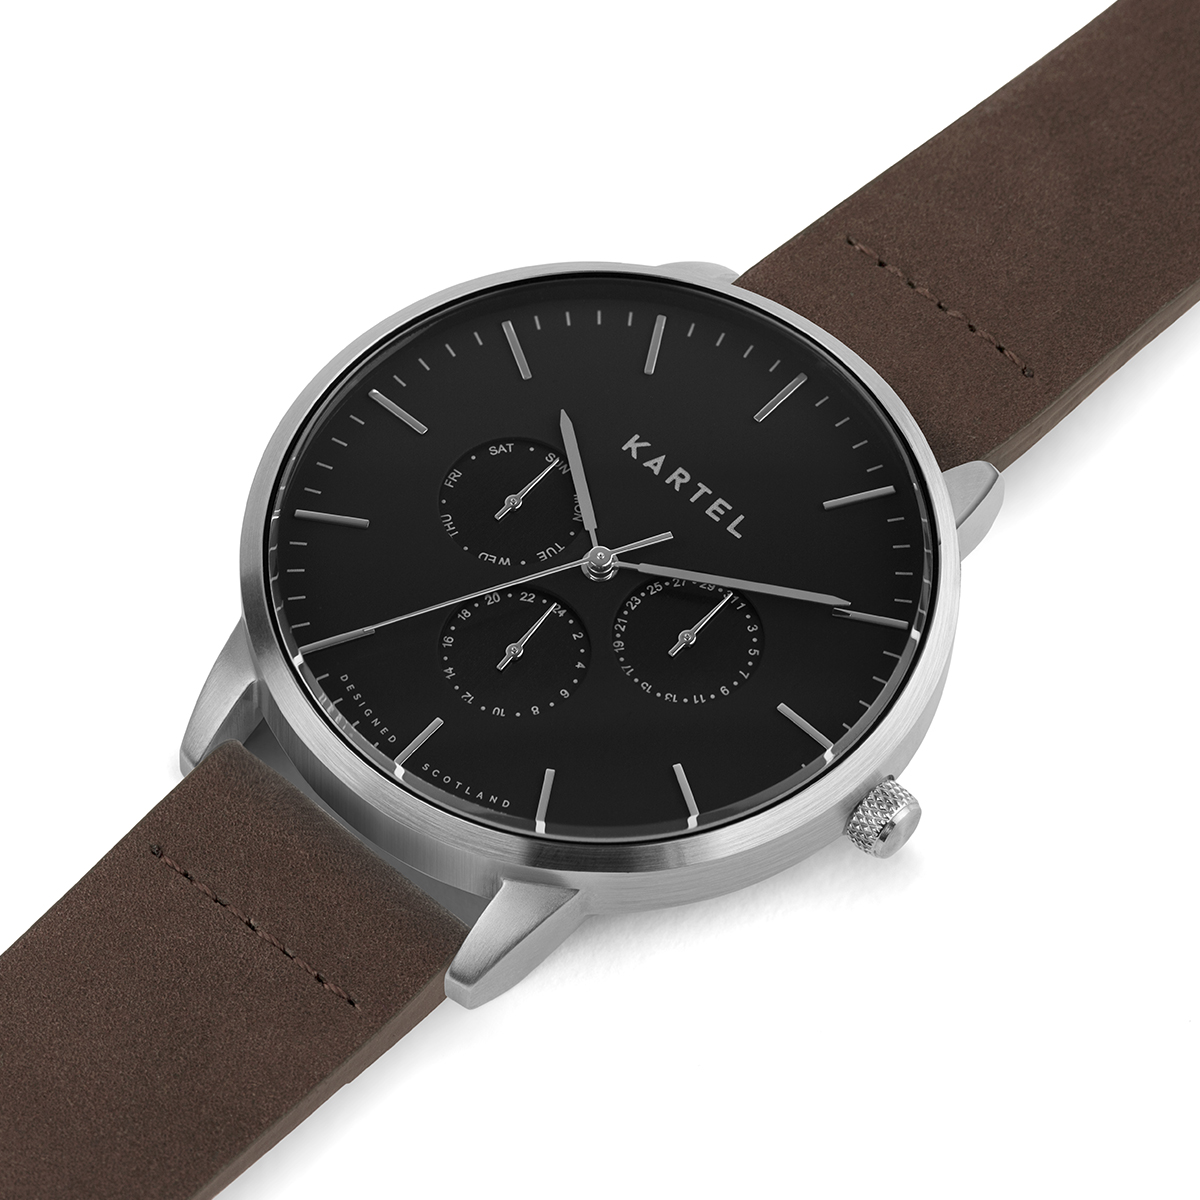 Kartel cuillin's silver on black model with a brown leather strap.